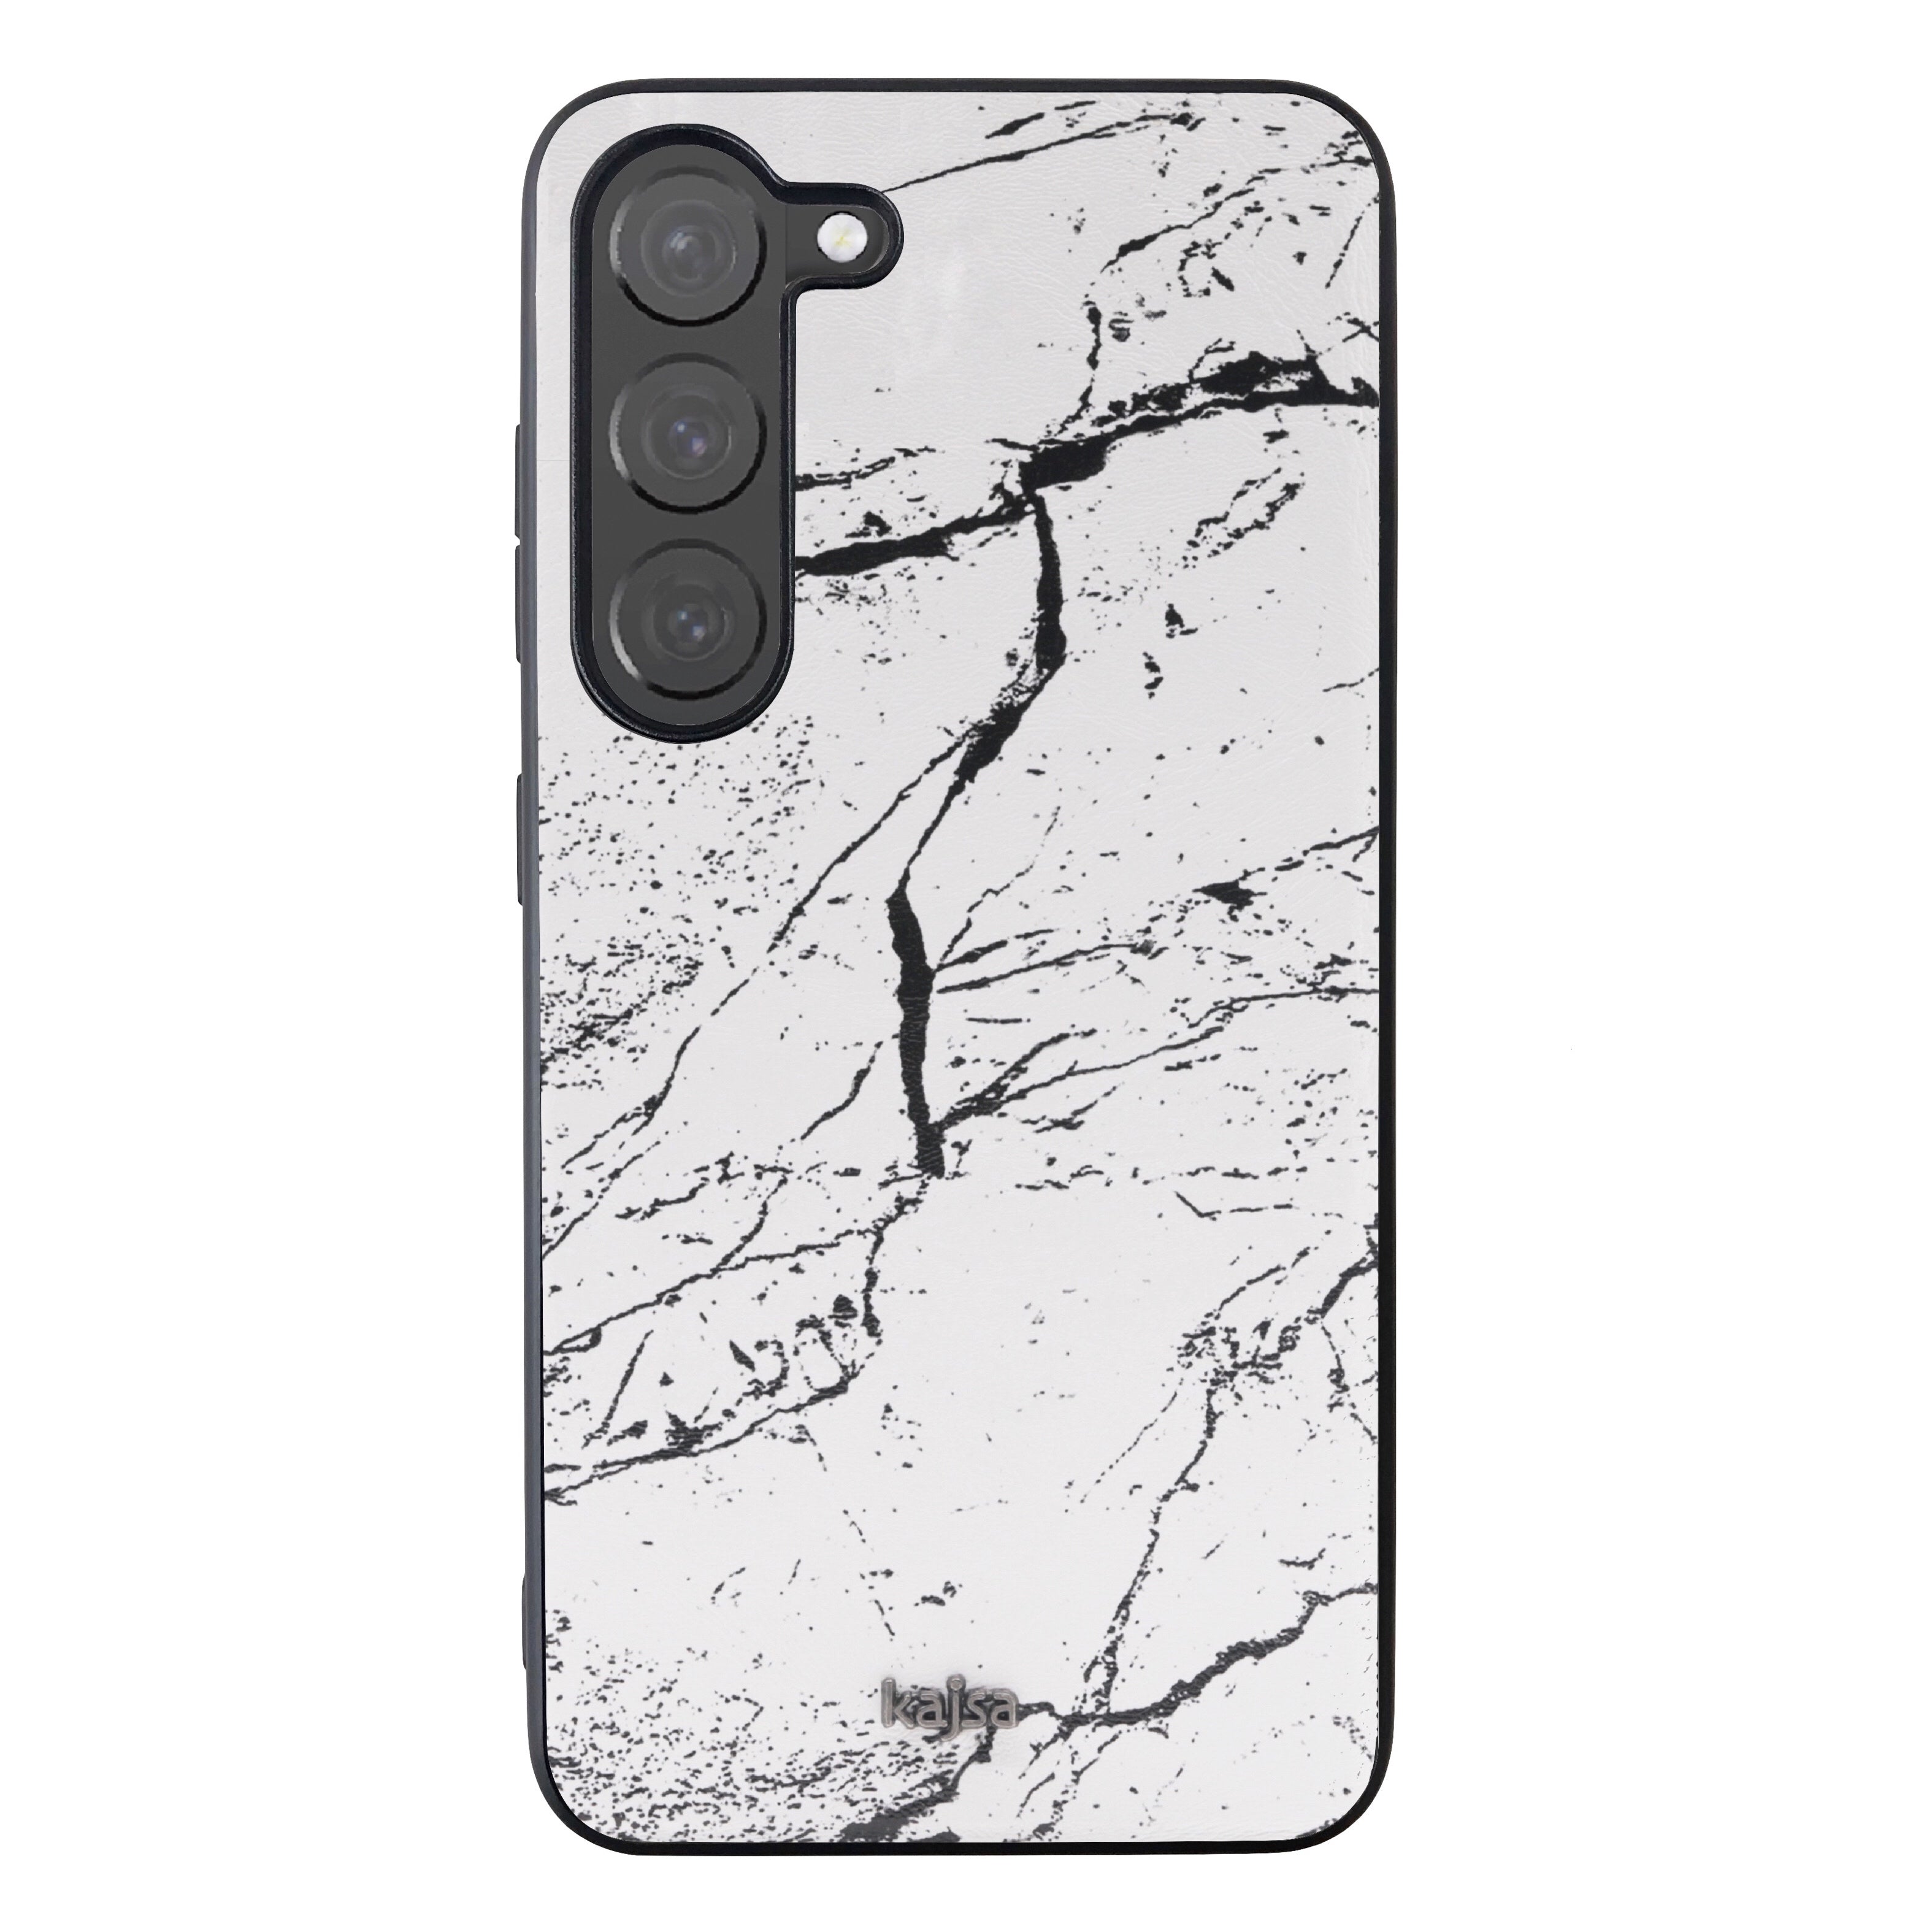 Preppie Collection - Marble PU Back Case for Samsung Galaxy S23/S23+/S23 Ultra-Phone Case- phone case - phone cases- phone cover- iphone cover- iphone case- iphone cases- leather case- leather cases- DIYCASE - custom case - leather cover - hand strap case - croco pattern case - snake pattern case - carbon fiber phone case - phone case brand - unique phone case - high quality - phone case brand - protective case - buy phone case hong kong - online buy phone case - iphone‎手機殼 - 客製化手機殼 - samsung ‎手機殼 - 香港手機殼 -